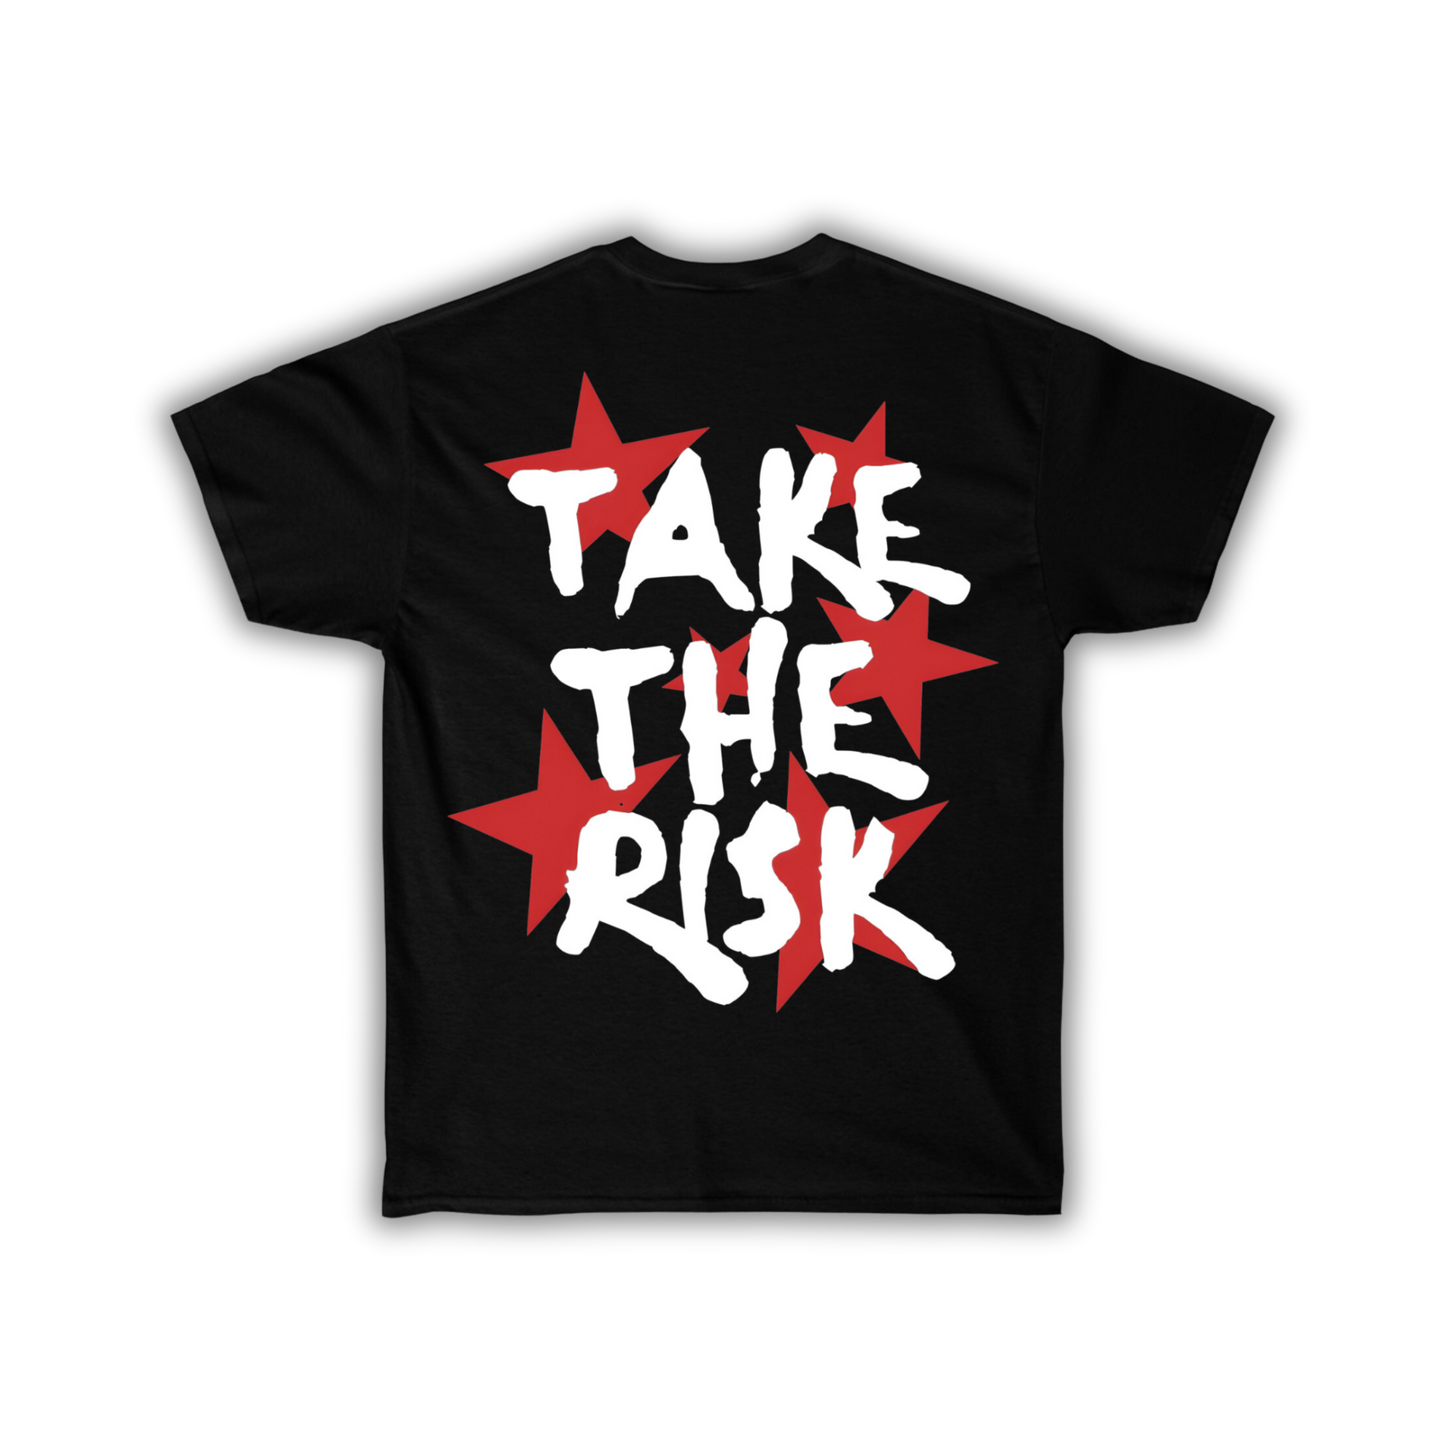 "Take The Risk" Graphic T-Shirt (Black)